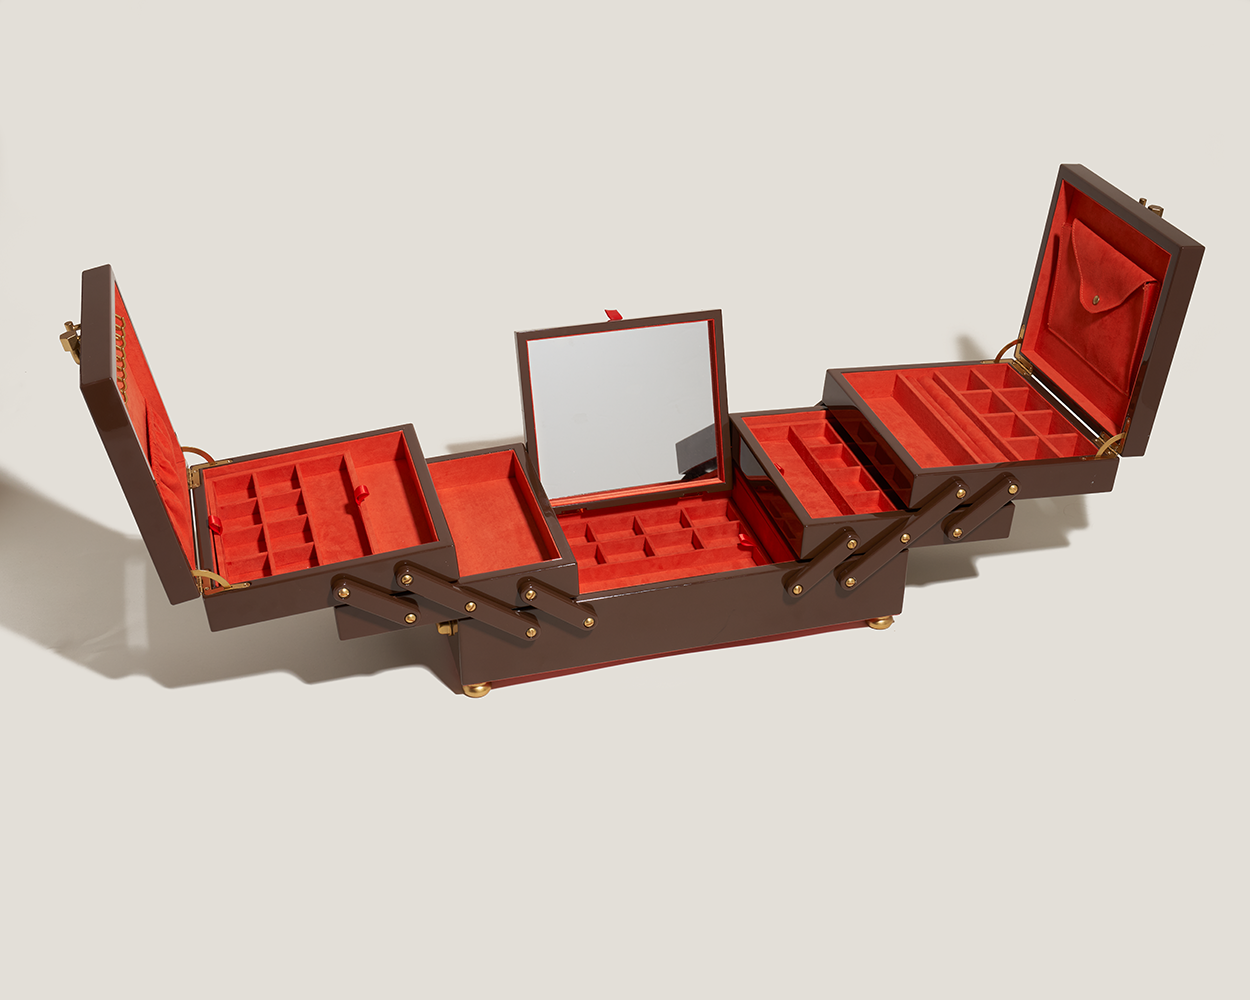 Open unique jewelry box with wooden exterior and red interior and attachment mirror